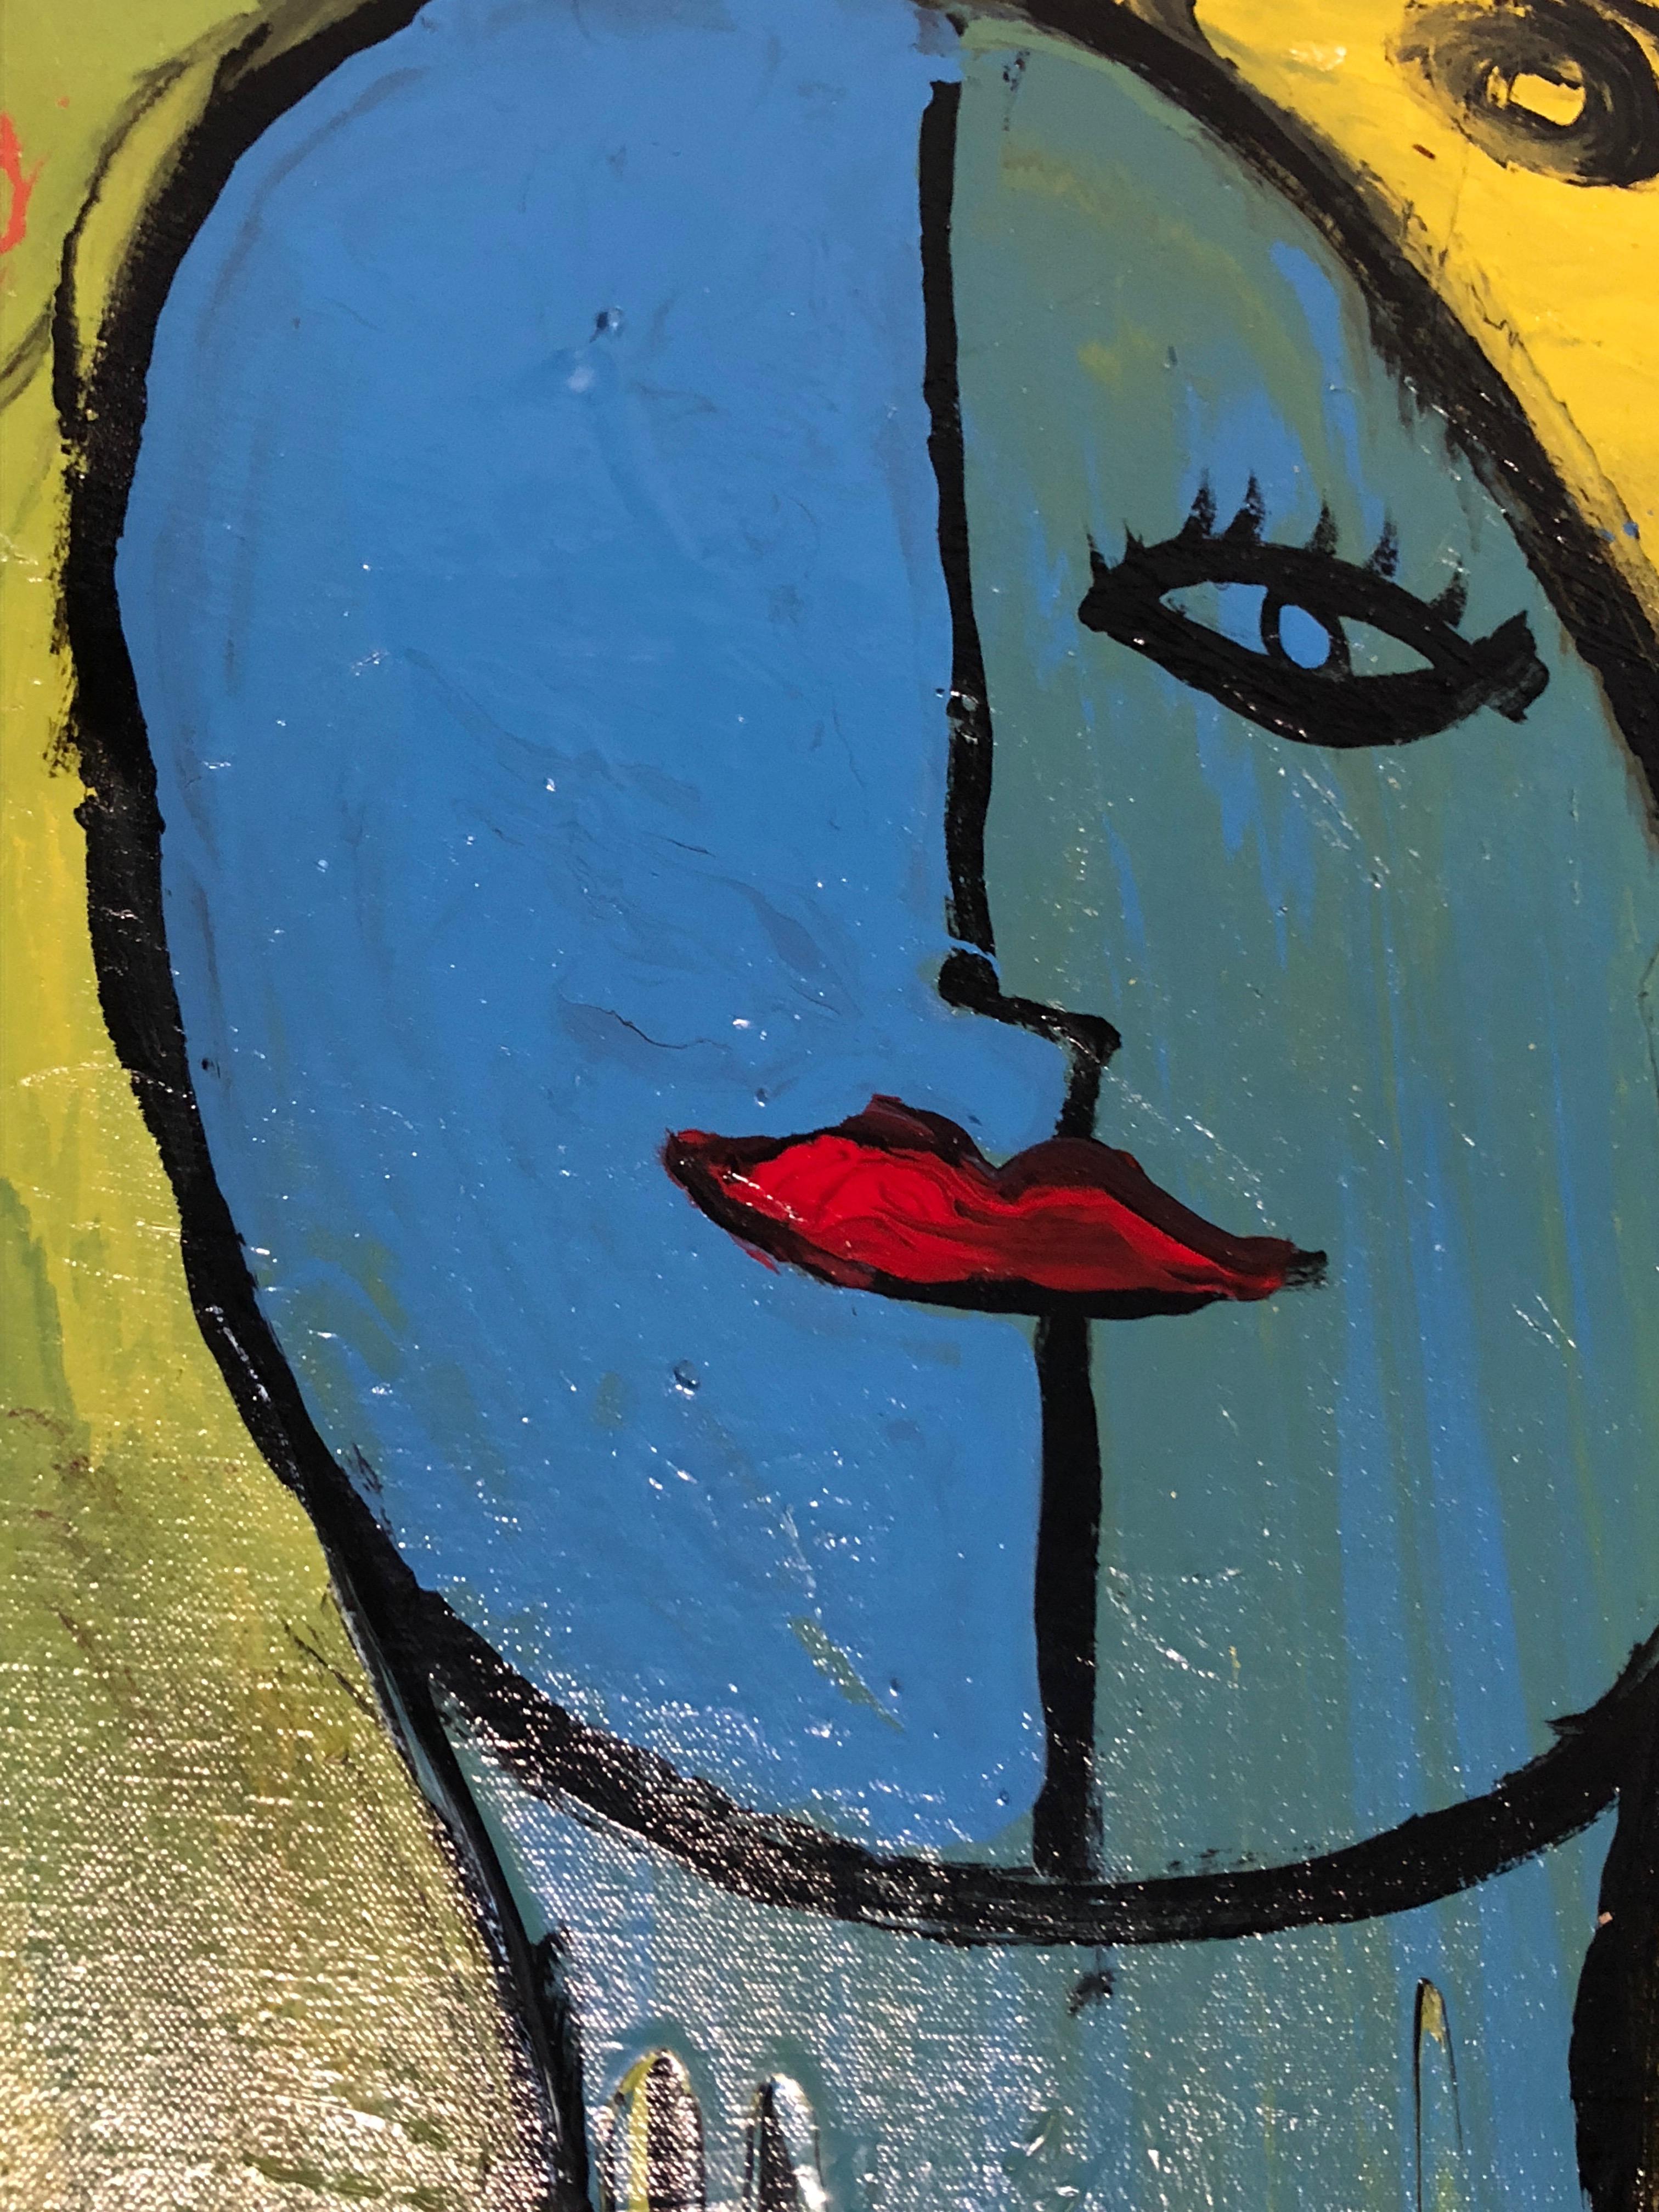 Large midcentury oil abstract on canvas of a woman. The blues and yellows used are especially vibrant and dramatic. Frame has traces of blue paint. Unsigned.